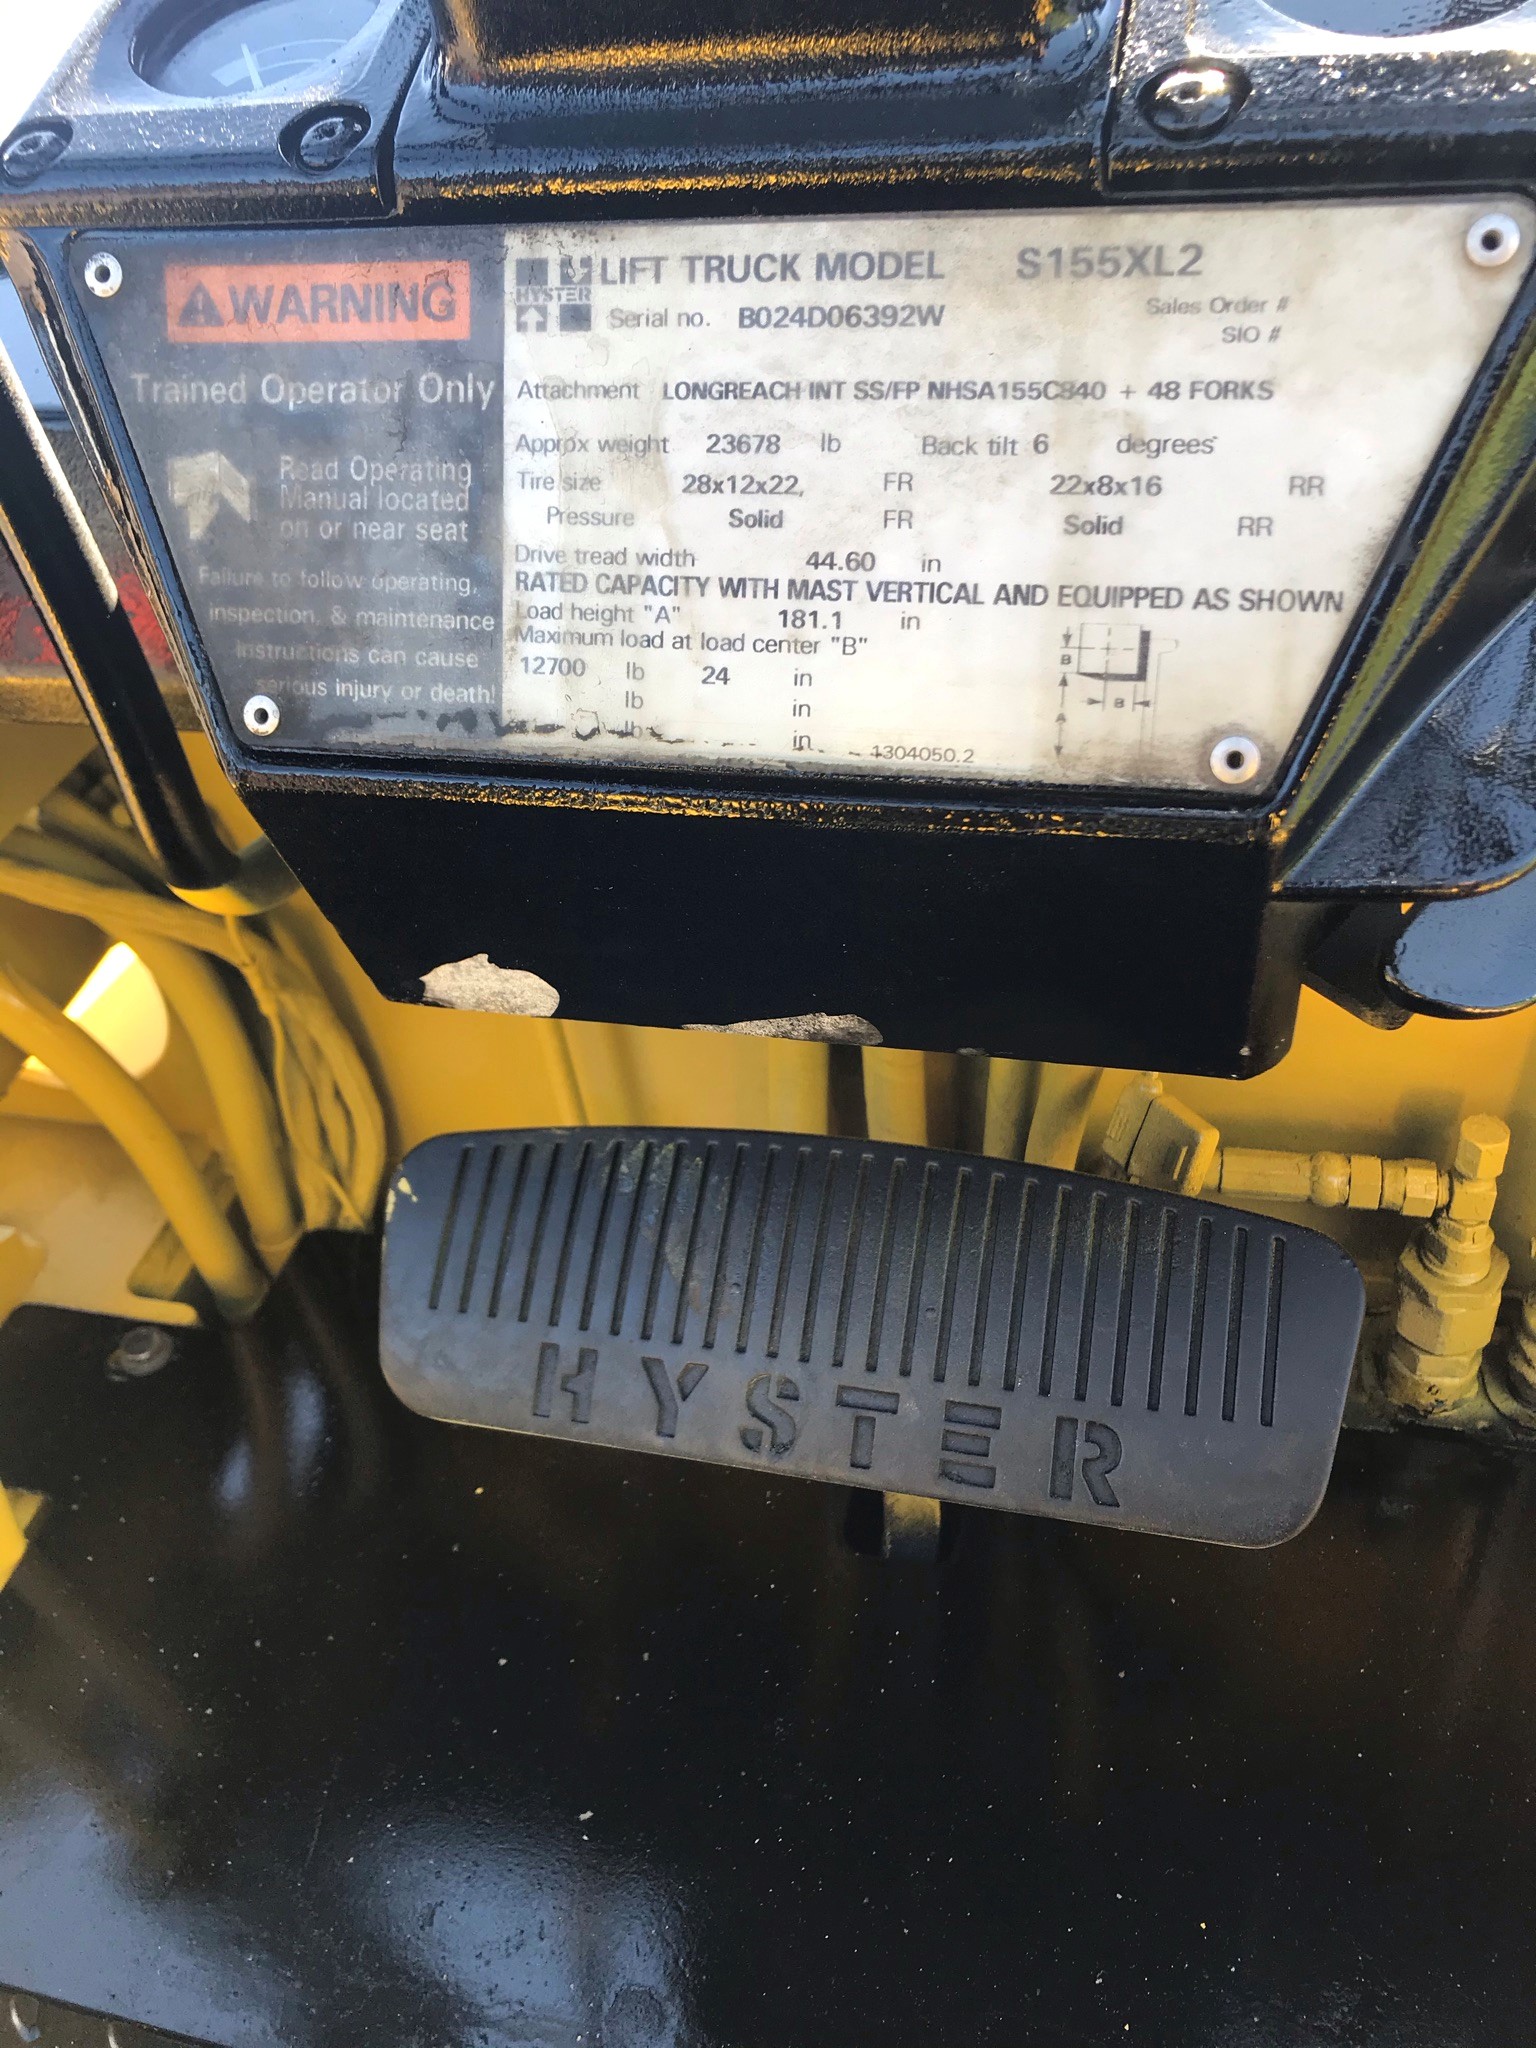 Model S155XL2 yellow hyster forklift with serial number B024D06392W for sale